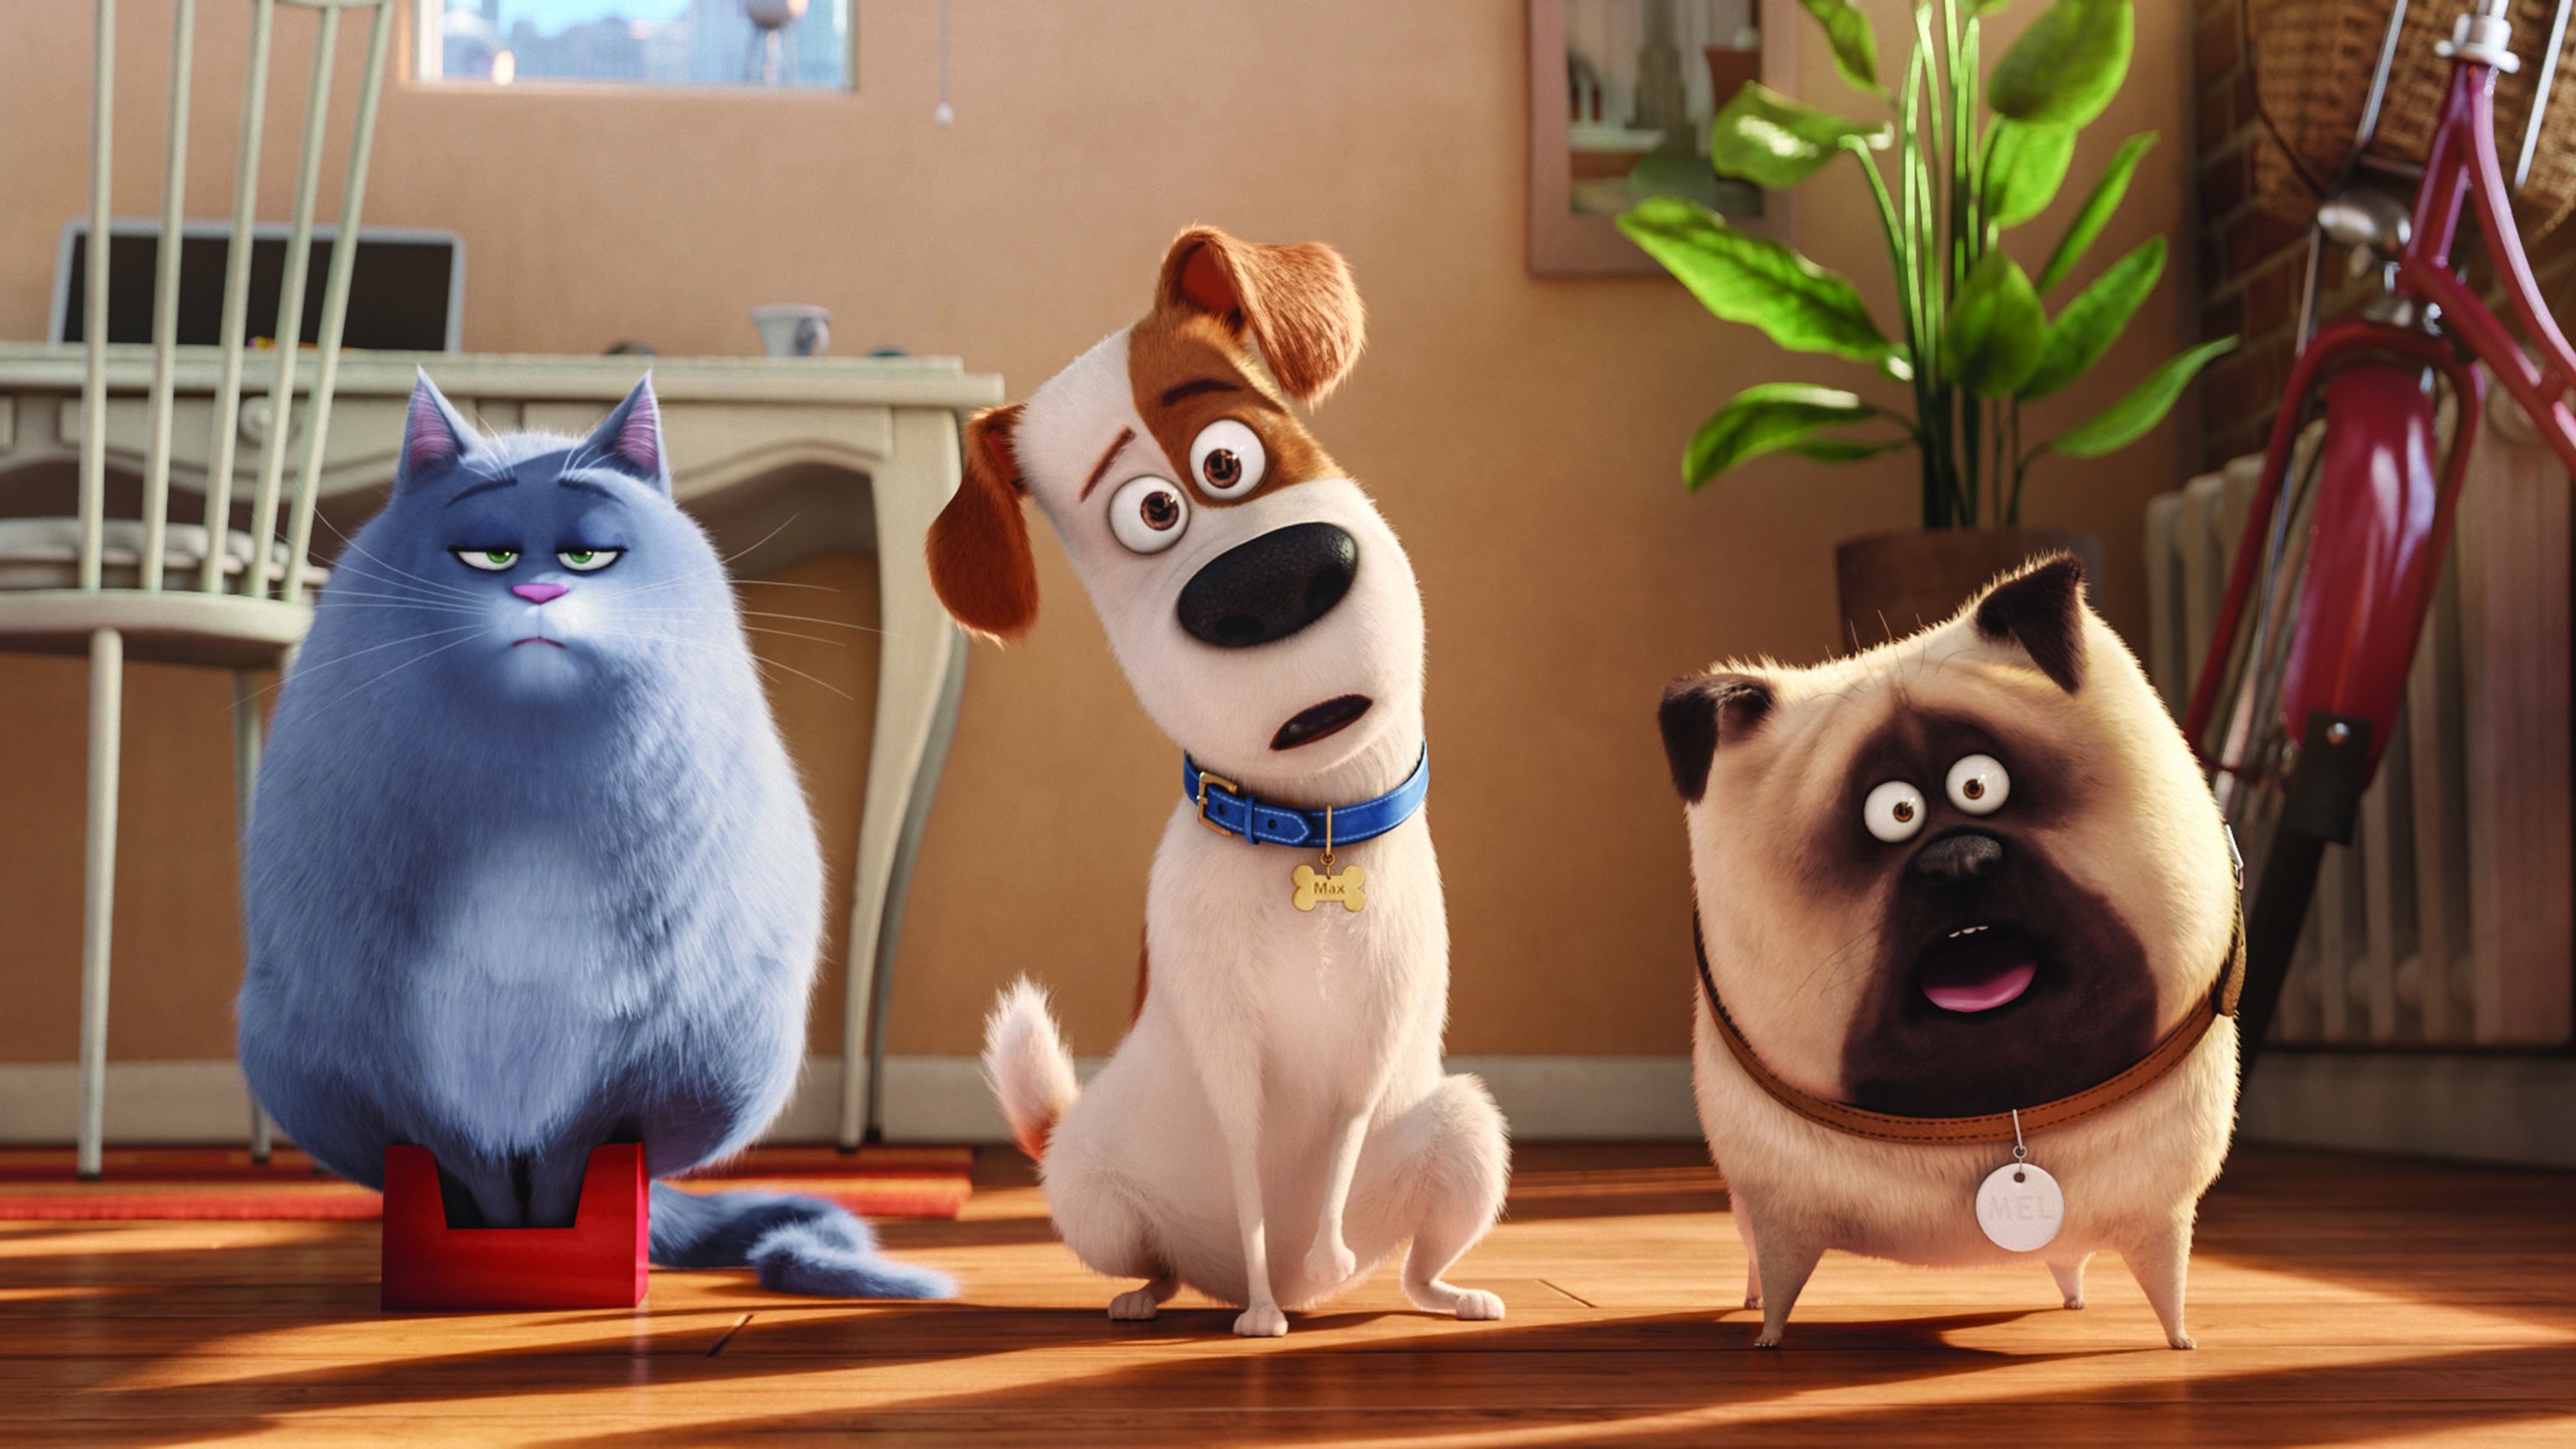 download the new version for iphoneThe Secret Life of Pets